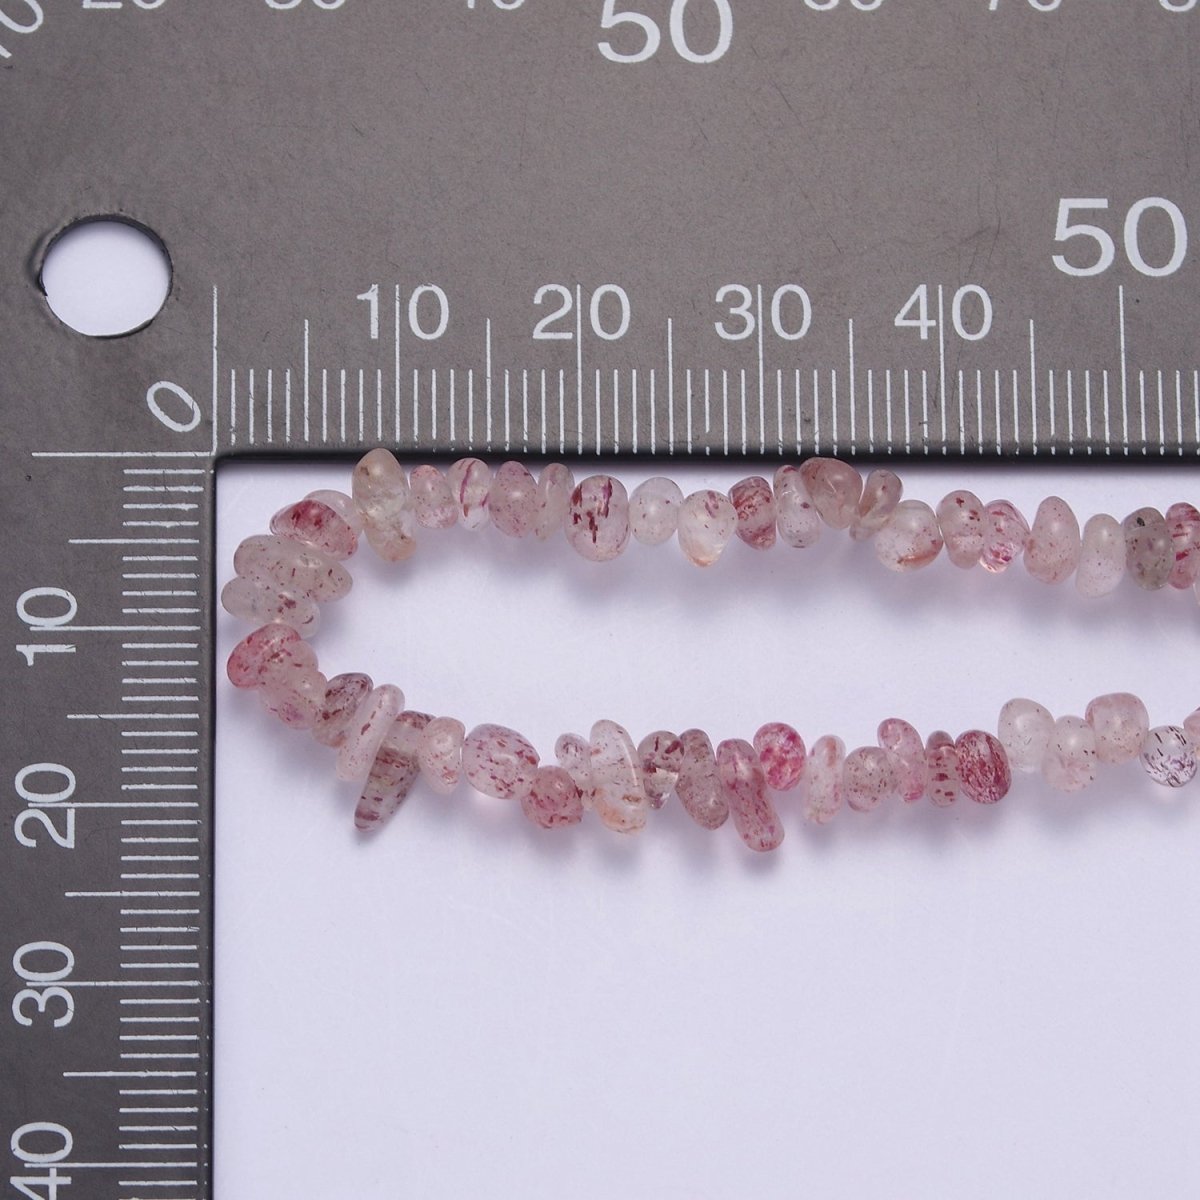 18.5 Inch Natural Pink Strawberry Quartz Crystal Stone Bead Necklace with 2" Extender | WA-632 Clearance Pricing - DLUXCA